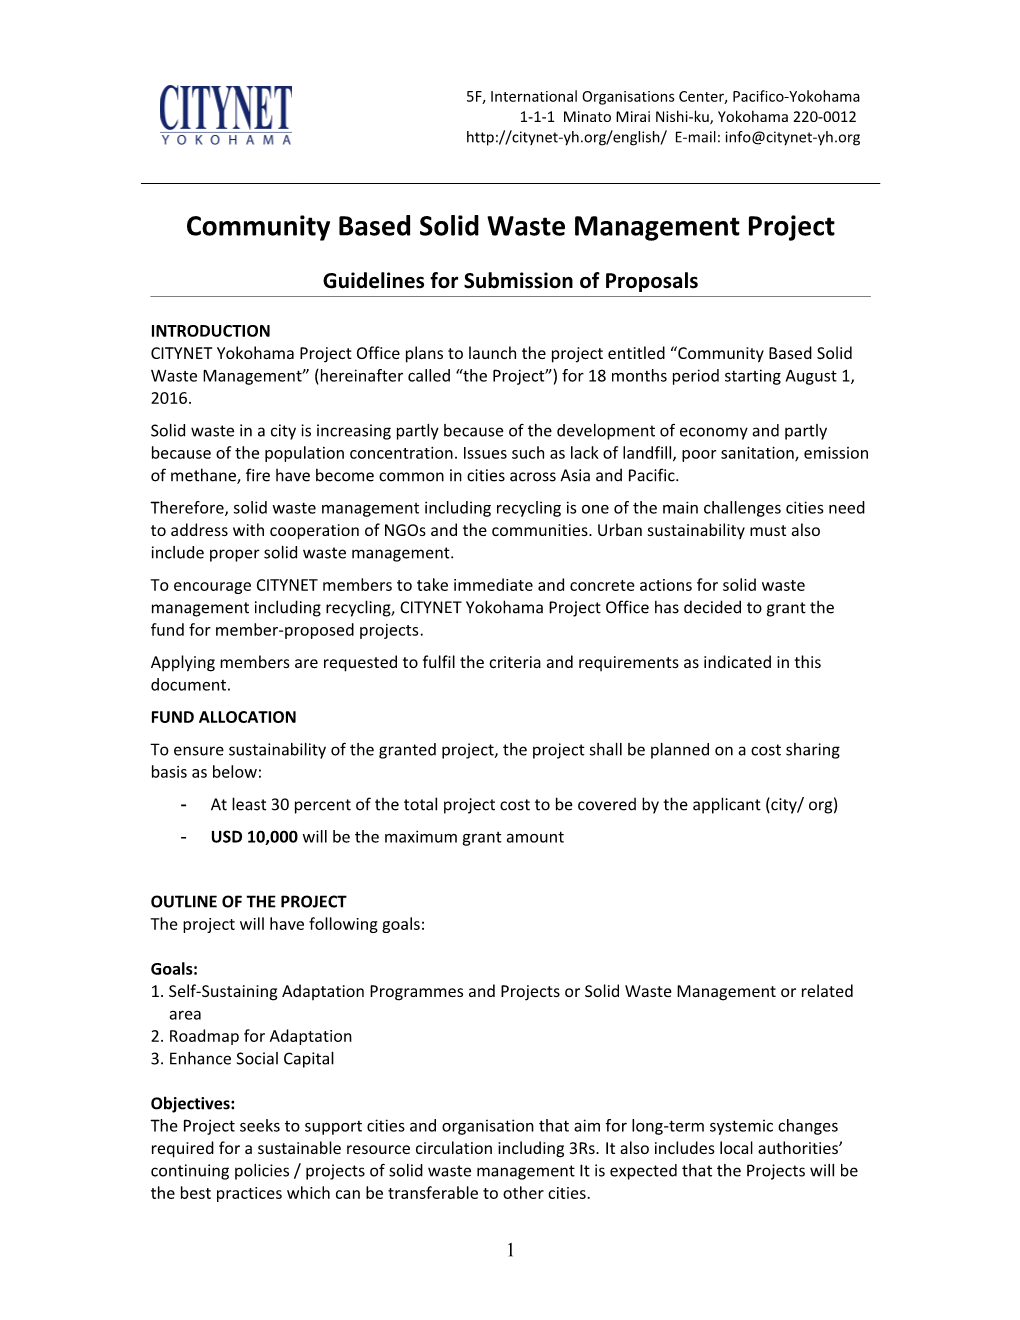 Community Based Solid Waste Management Project